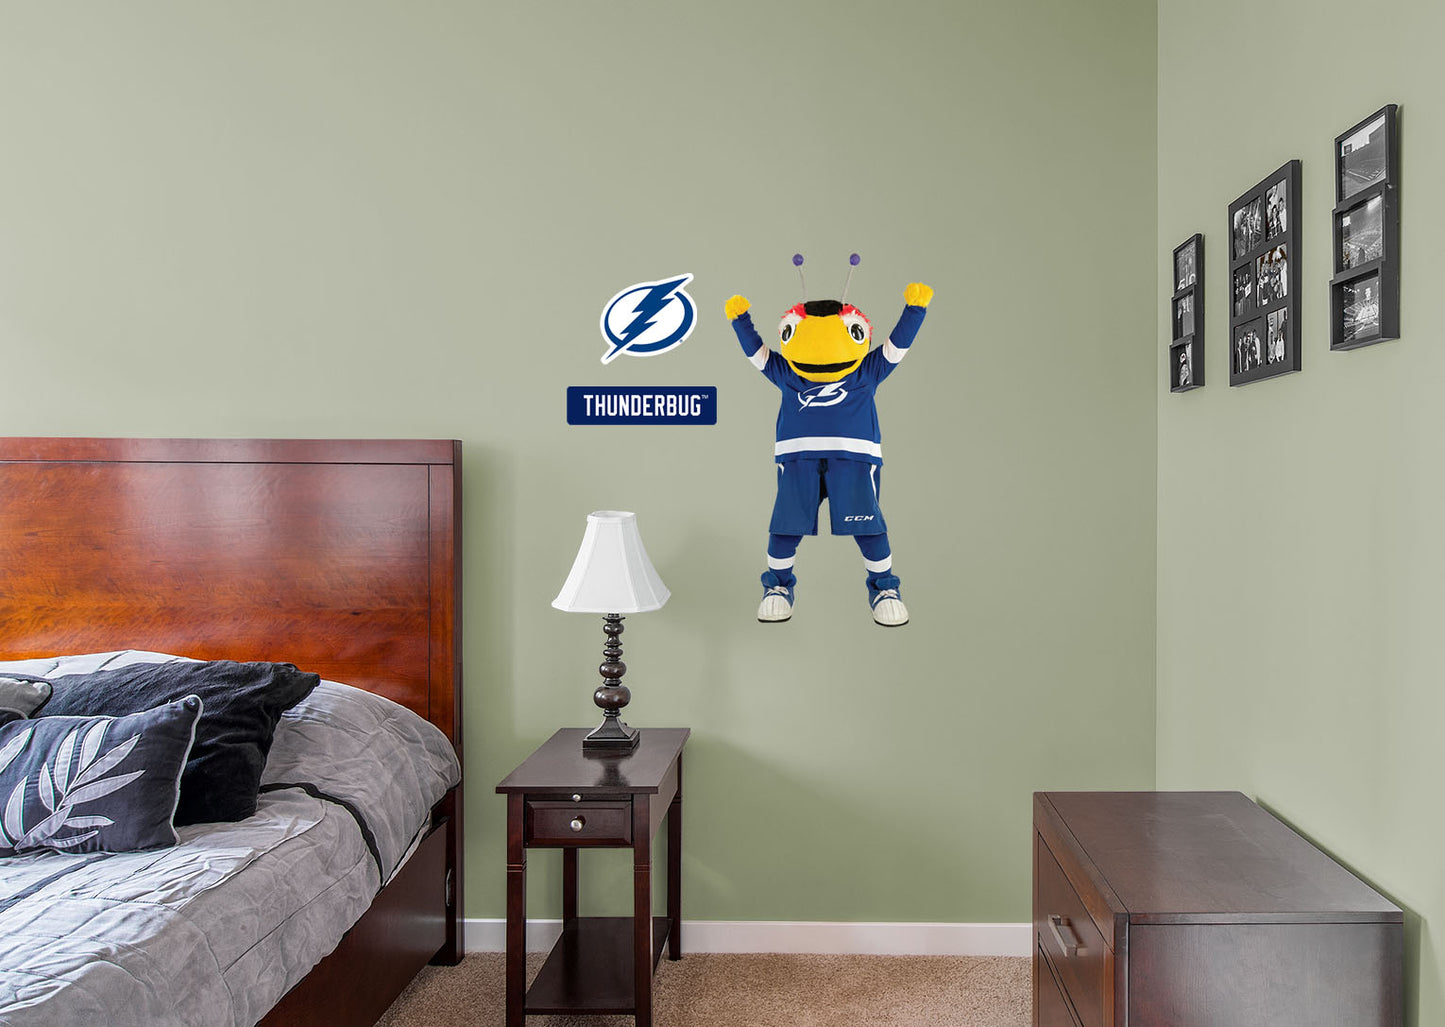 Tampa Bay Lightning: Thunderbug  Mascot        - Officially Licensed NHL Removable Wall   Adhesive Decal